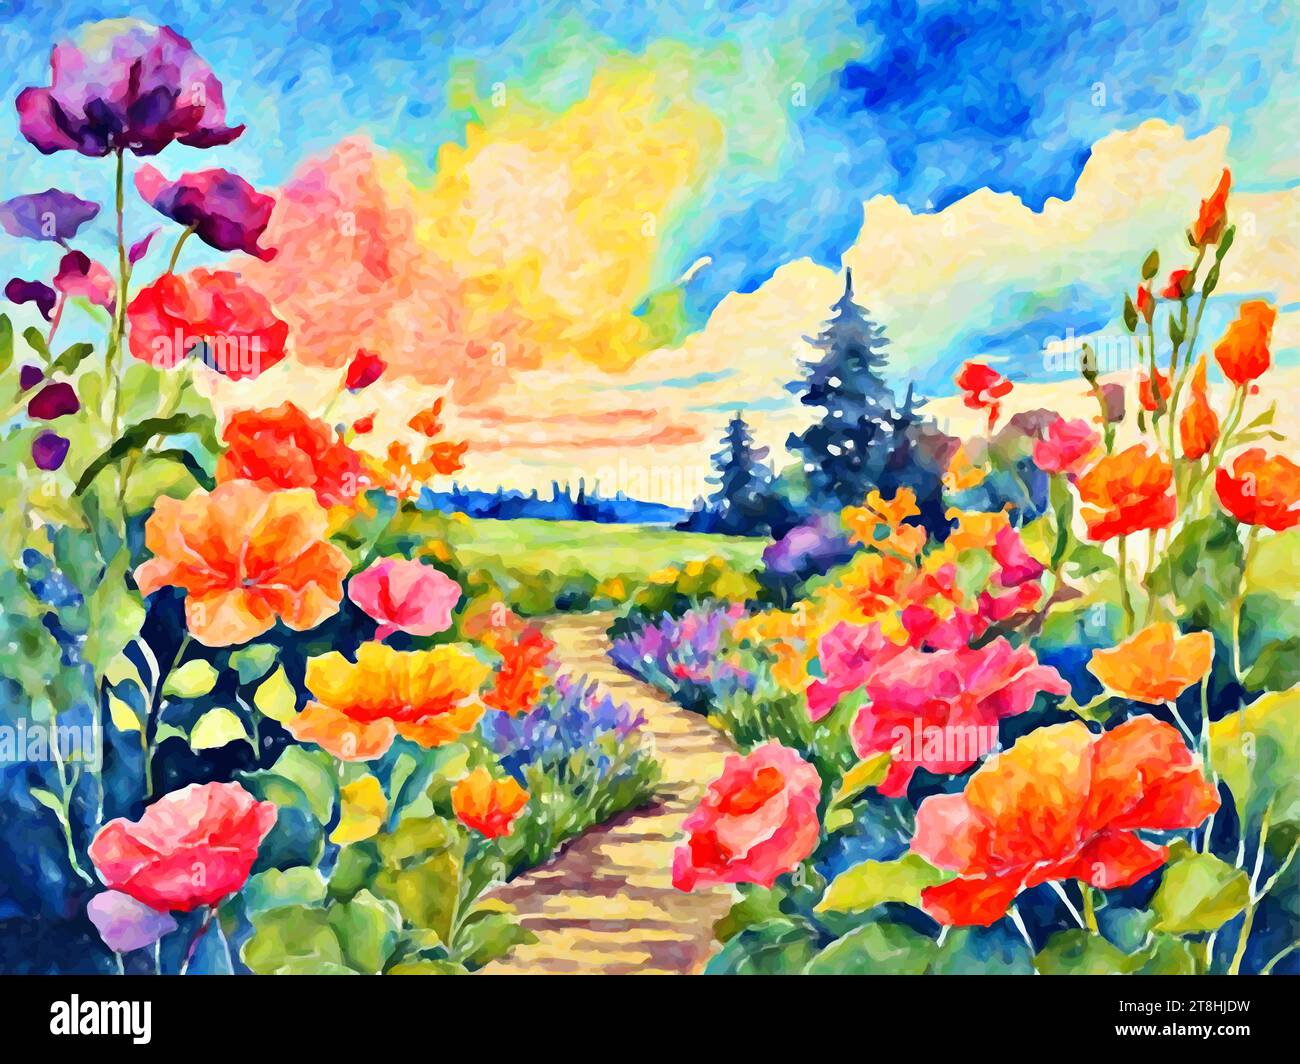 Vibrant Vistas: Spring Garden depicts a colorful and lively garden scene, filled with an array of blooming flowers in various shades and sizes. Stock Vector